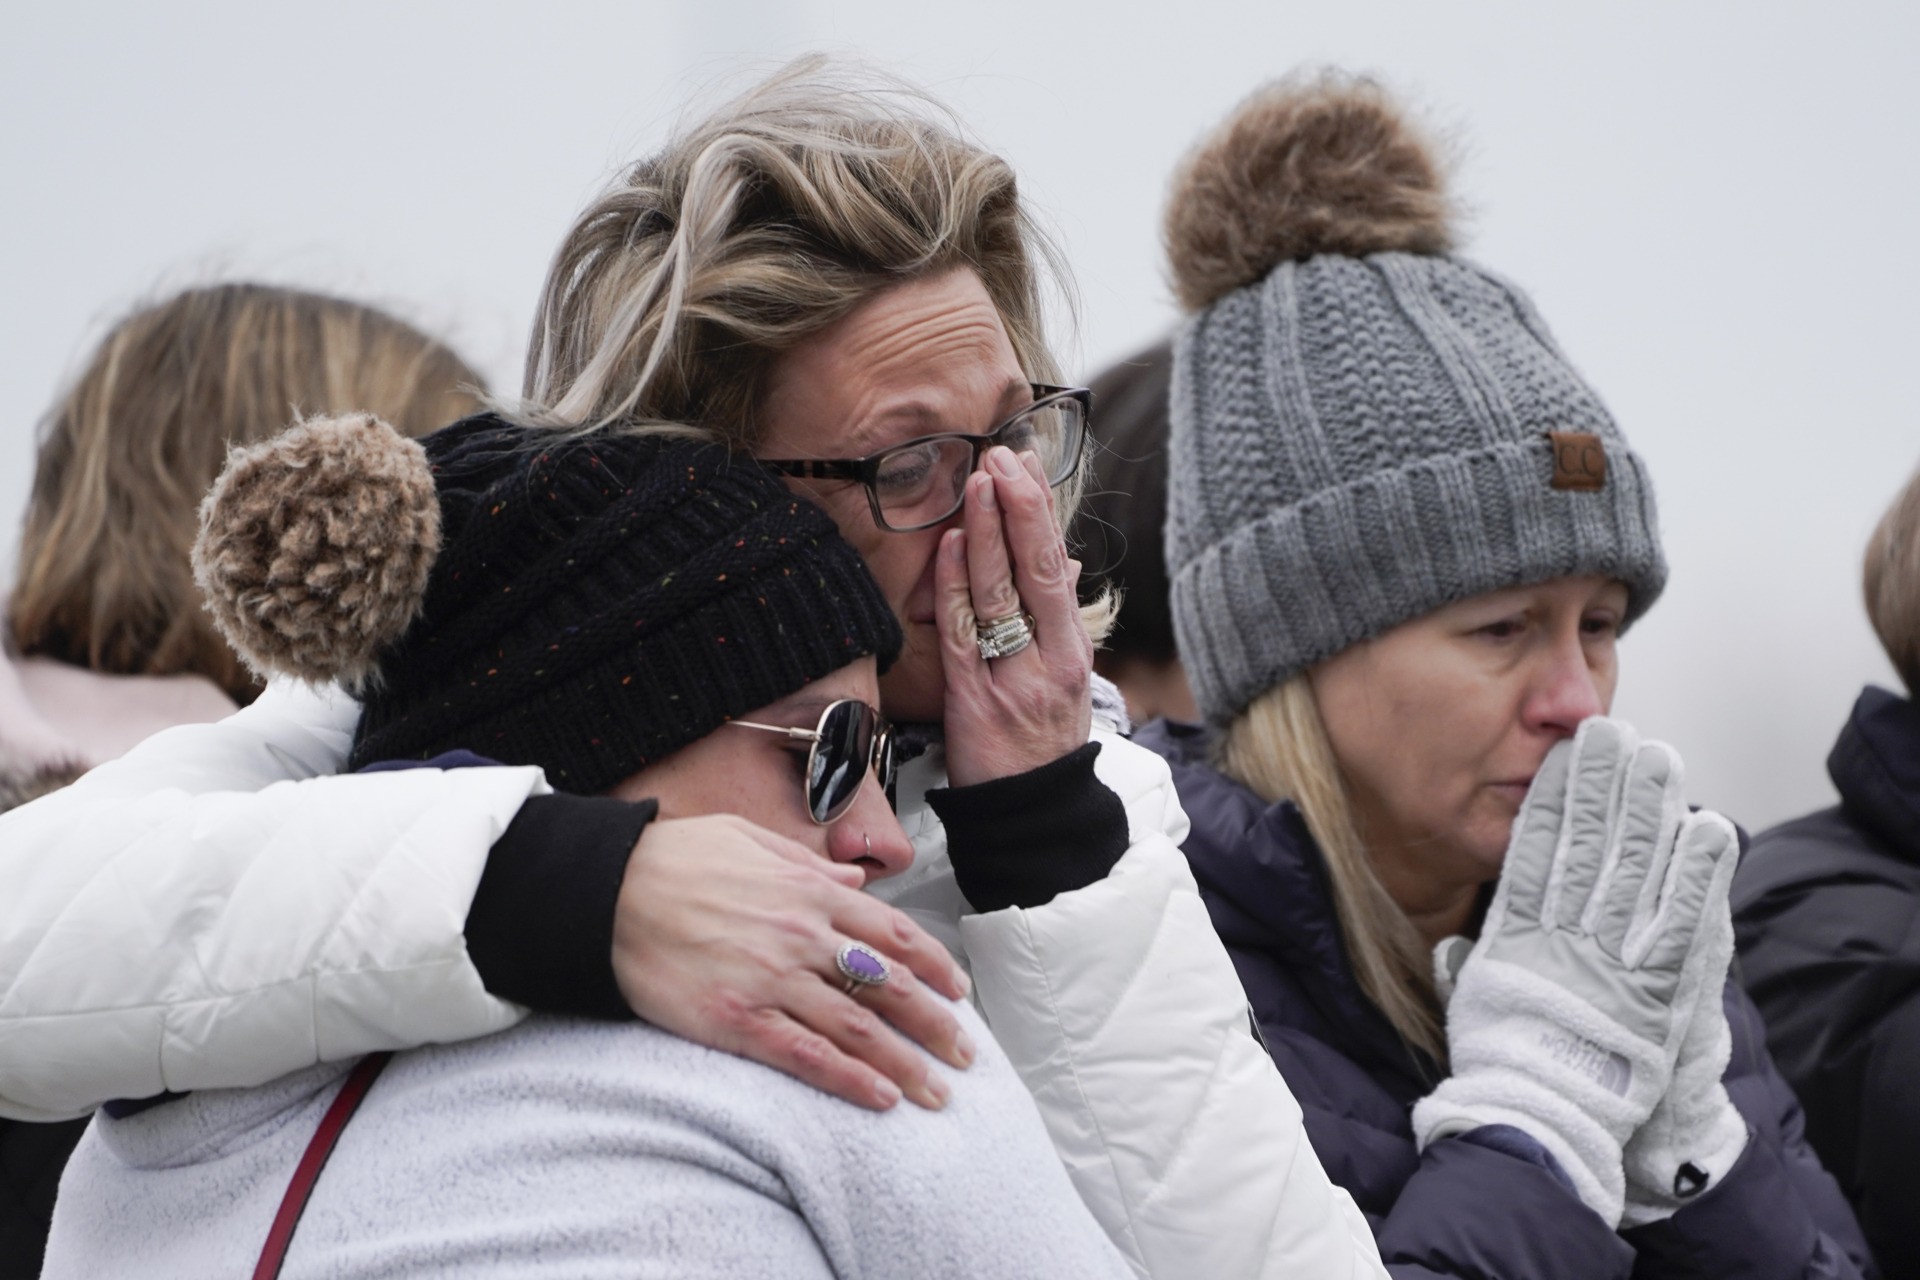 Parents of Oxford School Shooting Victims File $100M
Lawsuits Against Michigan School District 2